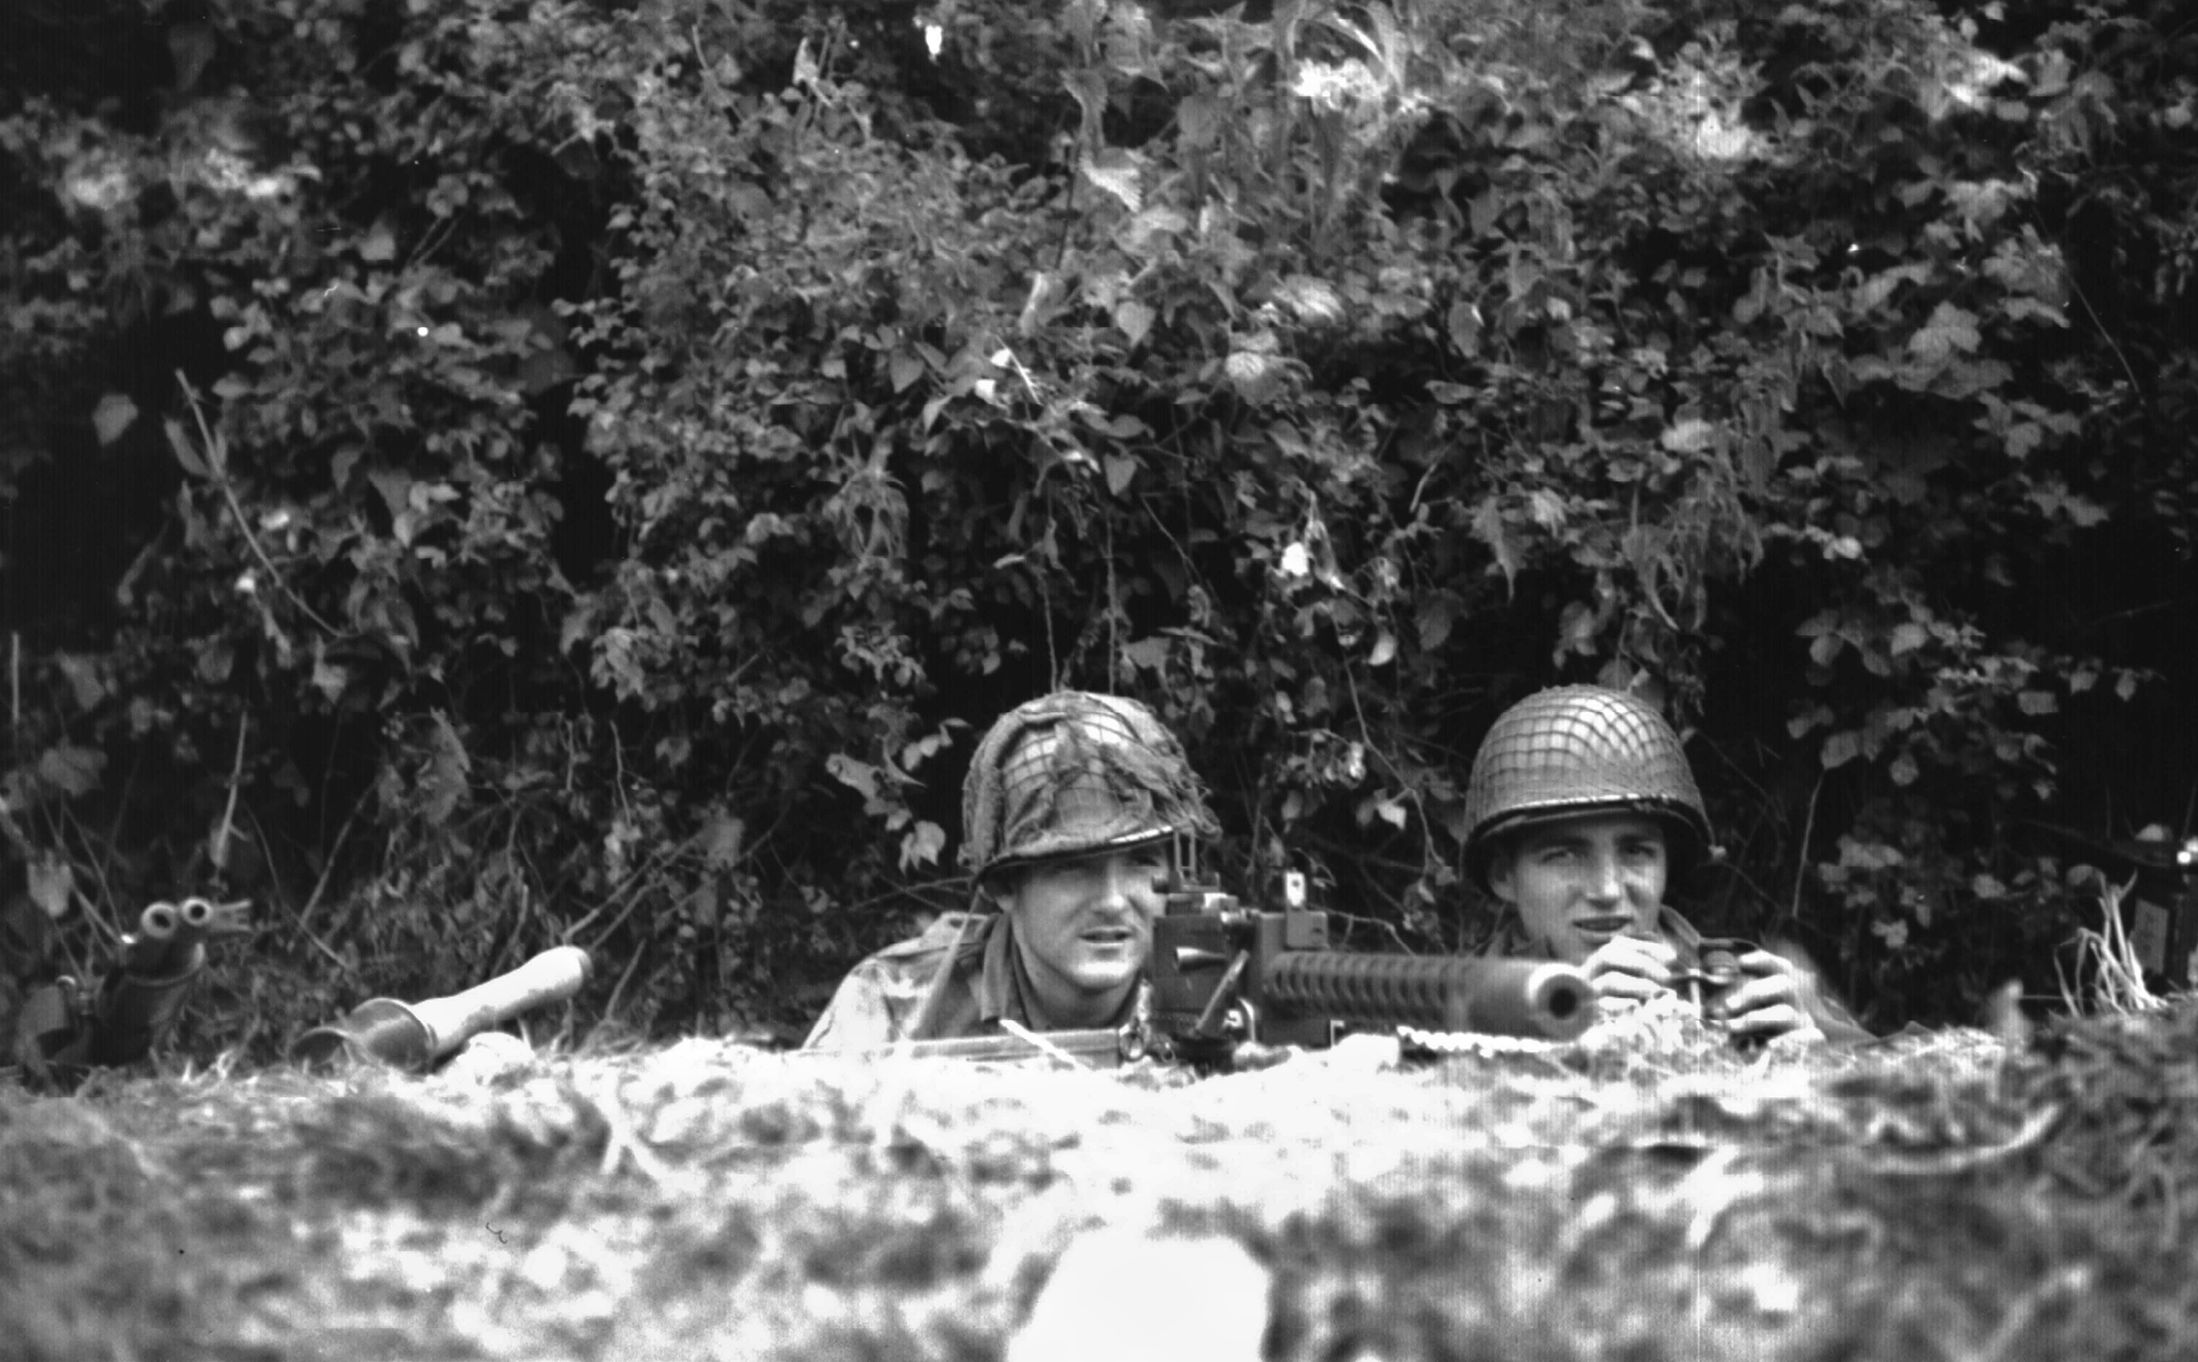 From their position in a hedgerow, .30-caliber machine gunners Walter “Smokey” Gordon (left) and Frank Millett, 506th PIR, stay alert for approaching Germans.